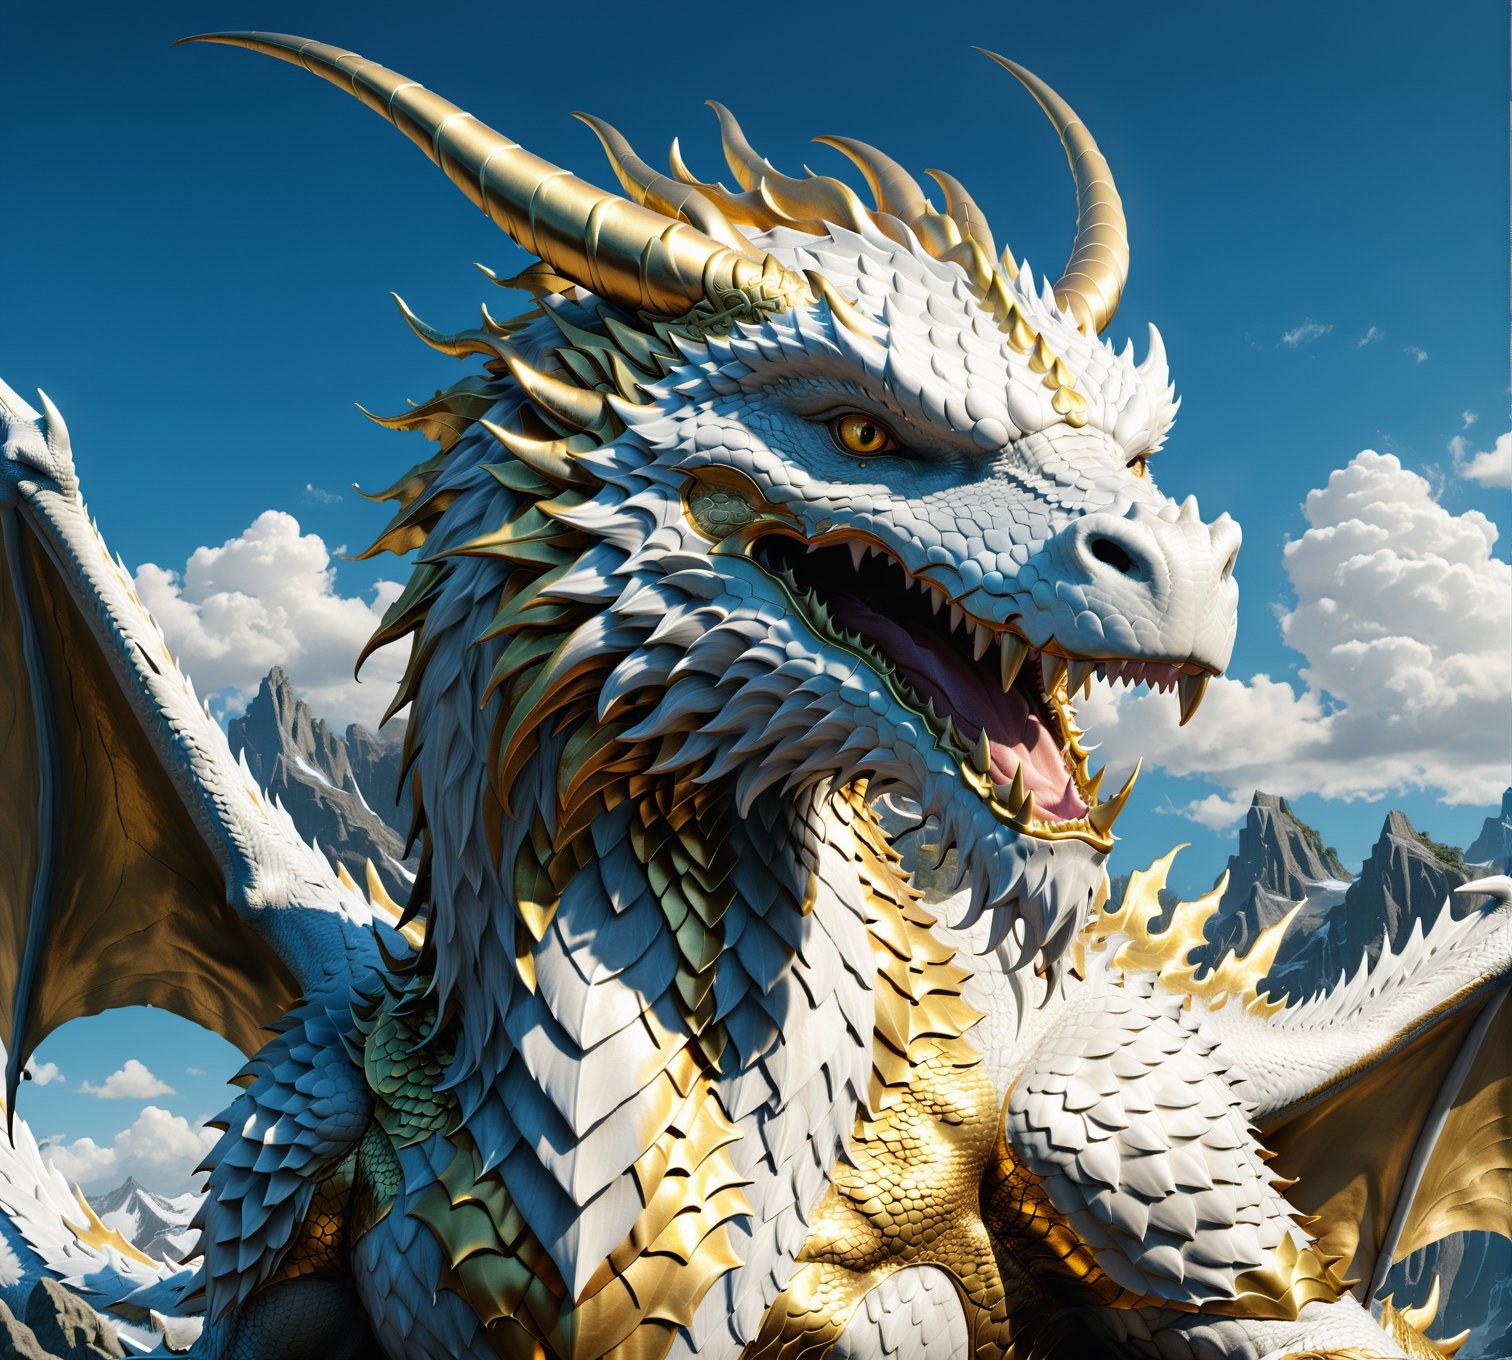 High definition photorealistic render of an incredible and  mythical giant  white and gold dragon,